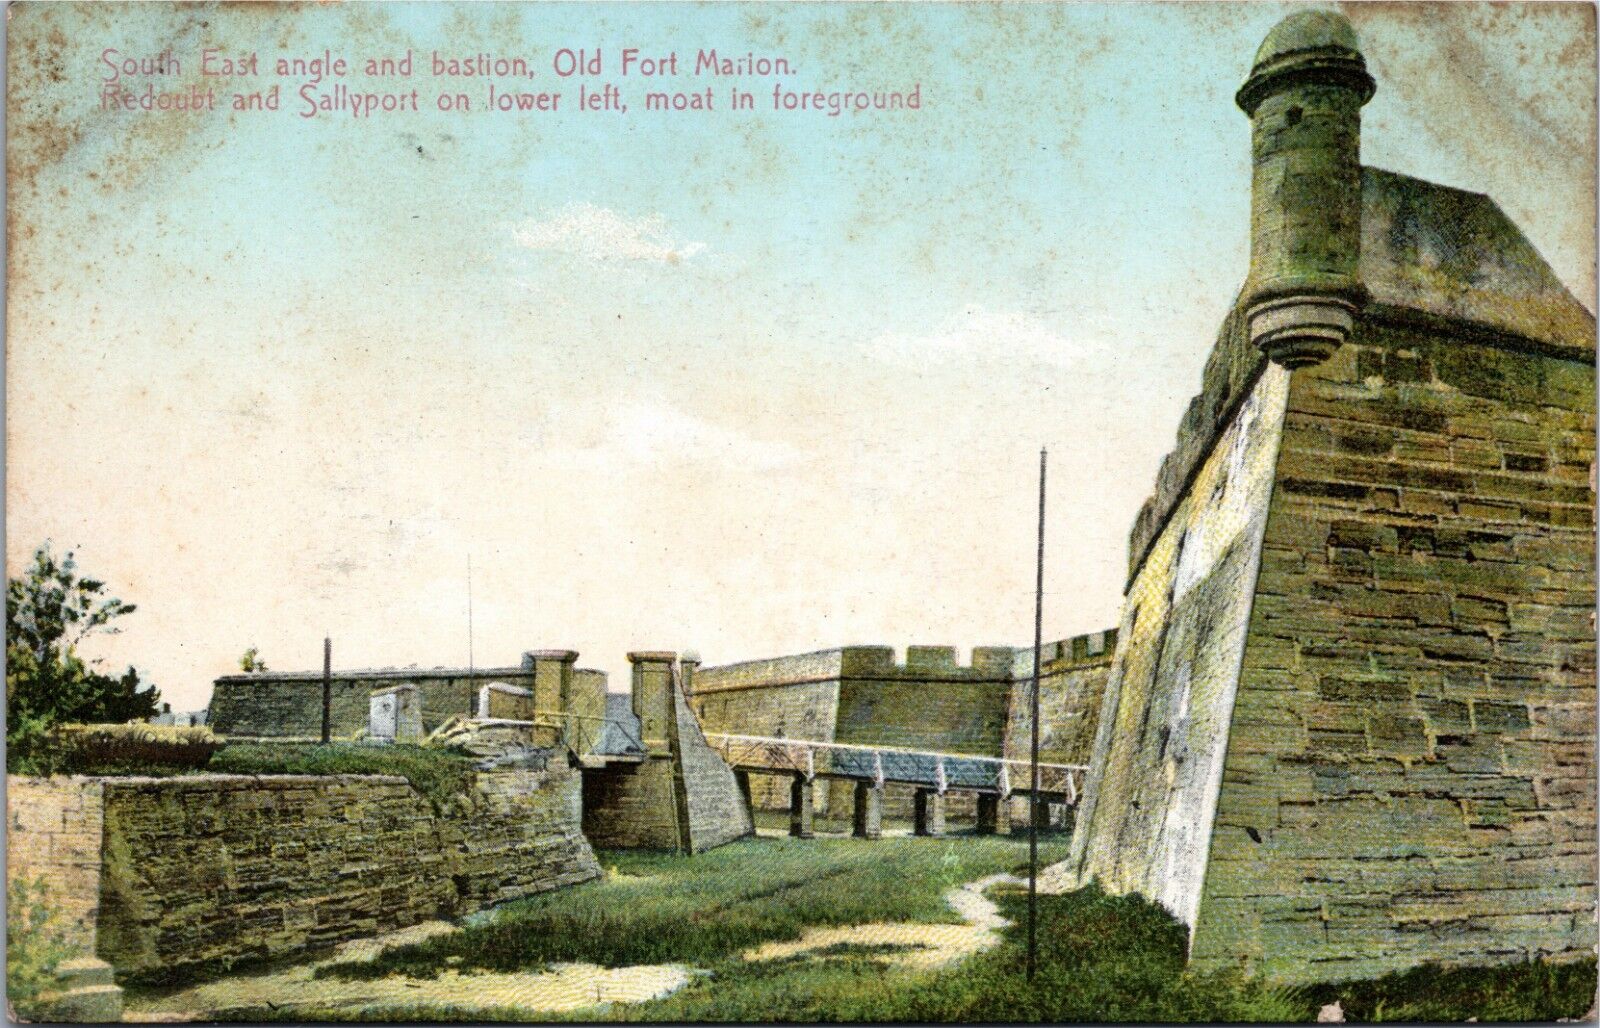 Old Fort Marion, South East angle and bastion, Florida